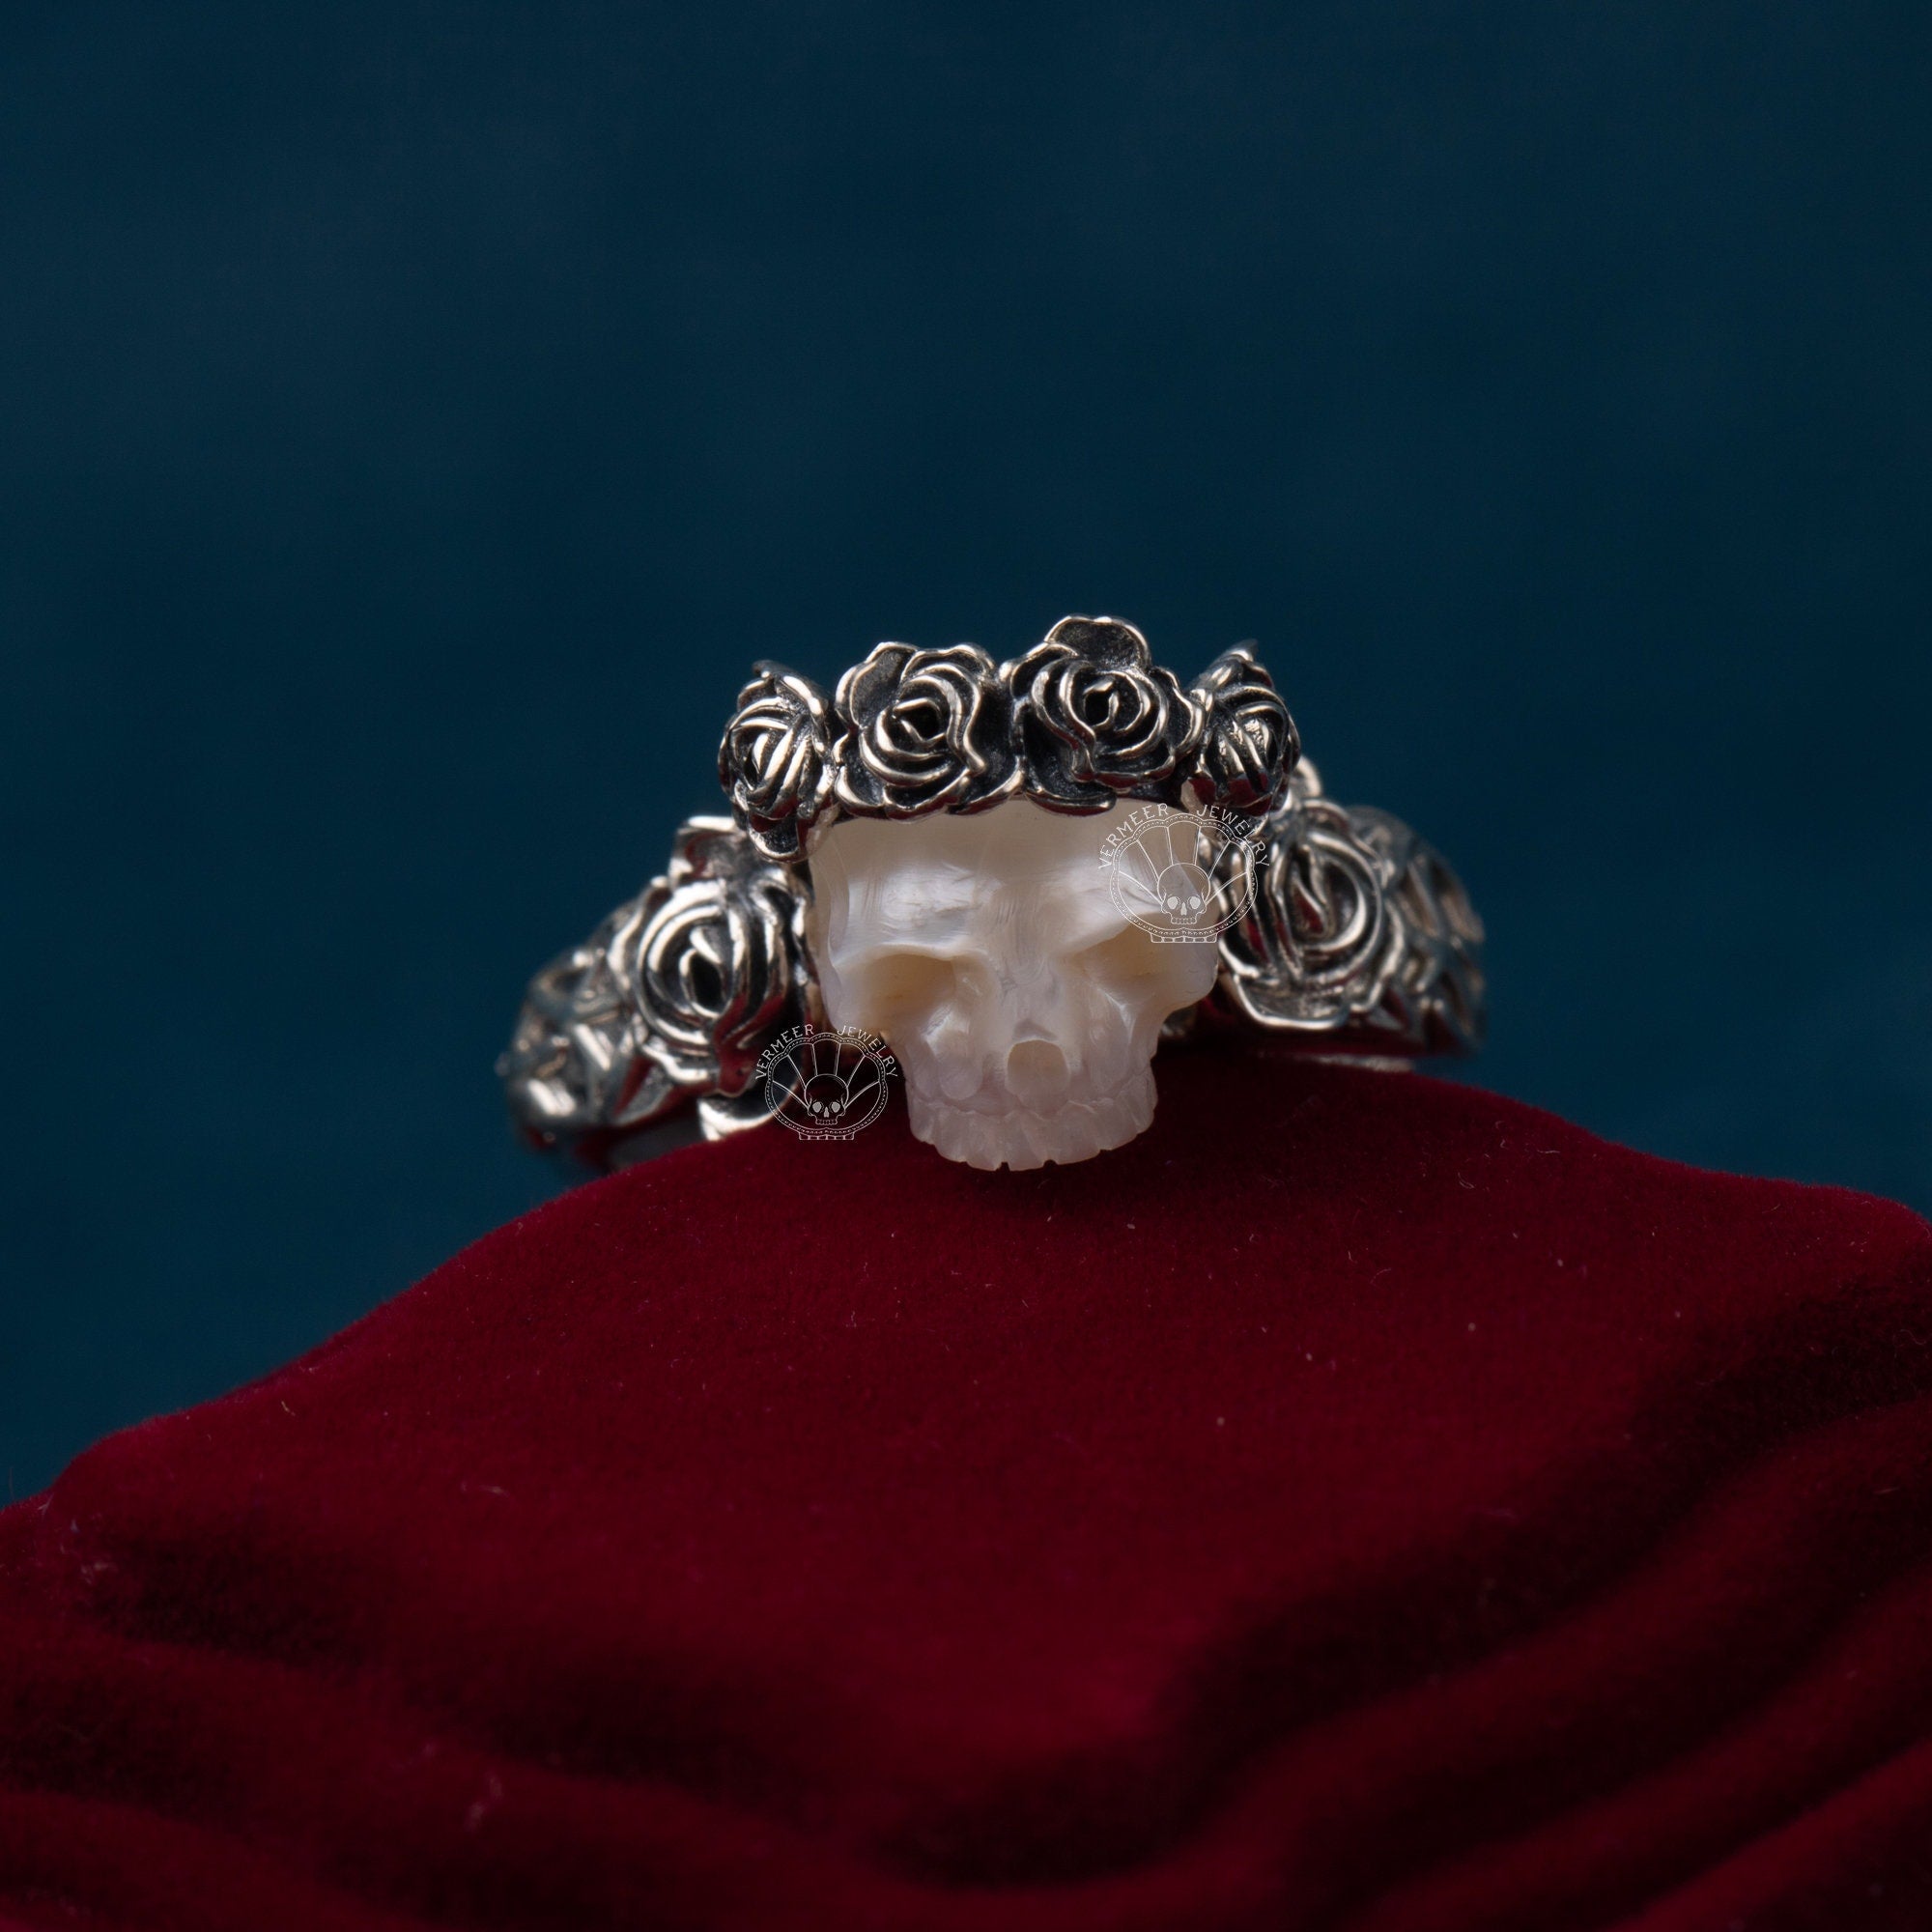 Artemis' Garland Ring 925 silver pearl carved skull ring wreath sterling silver ring